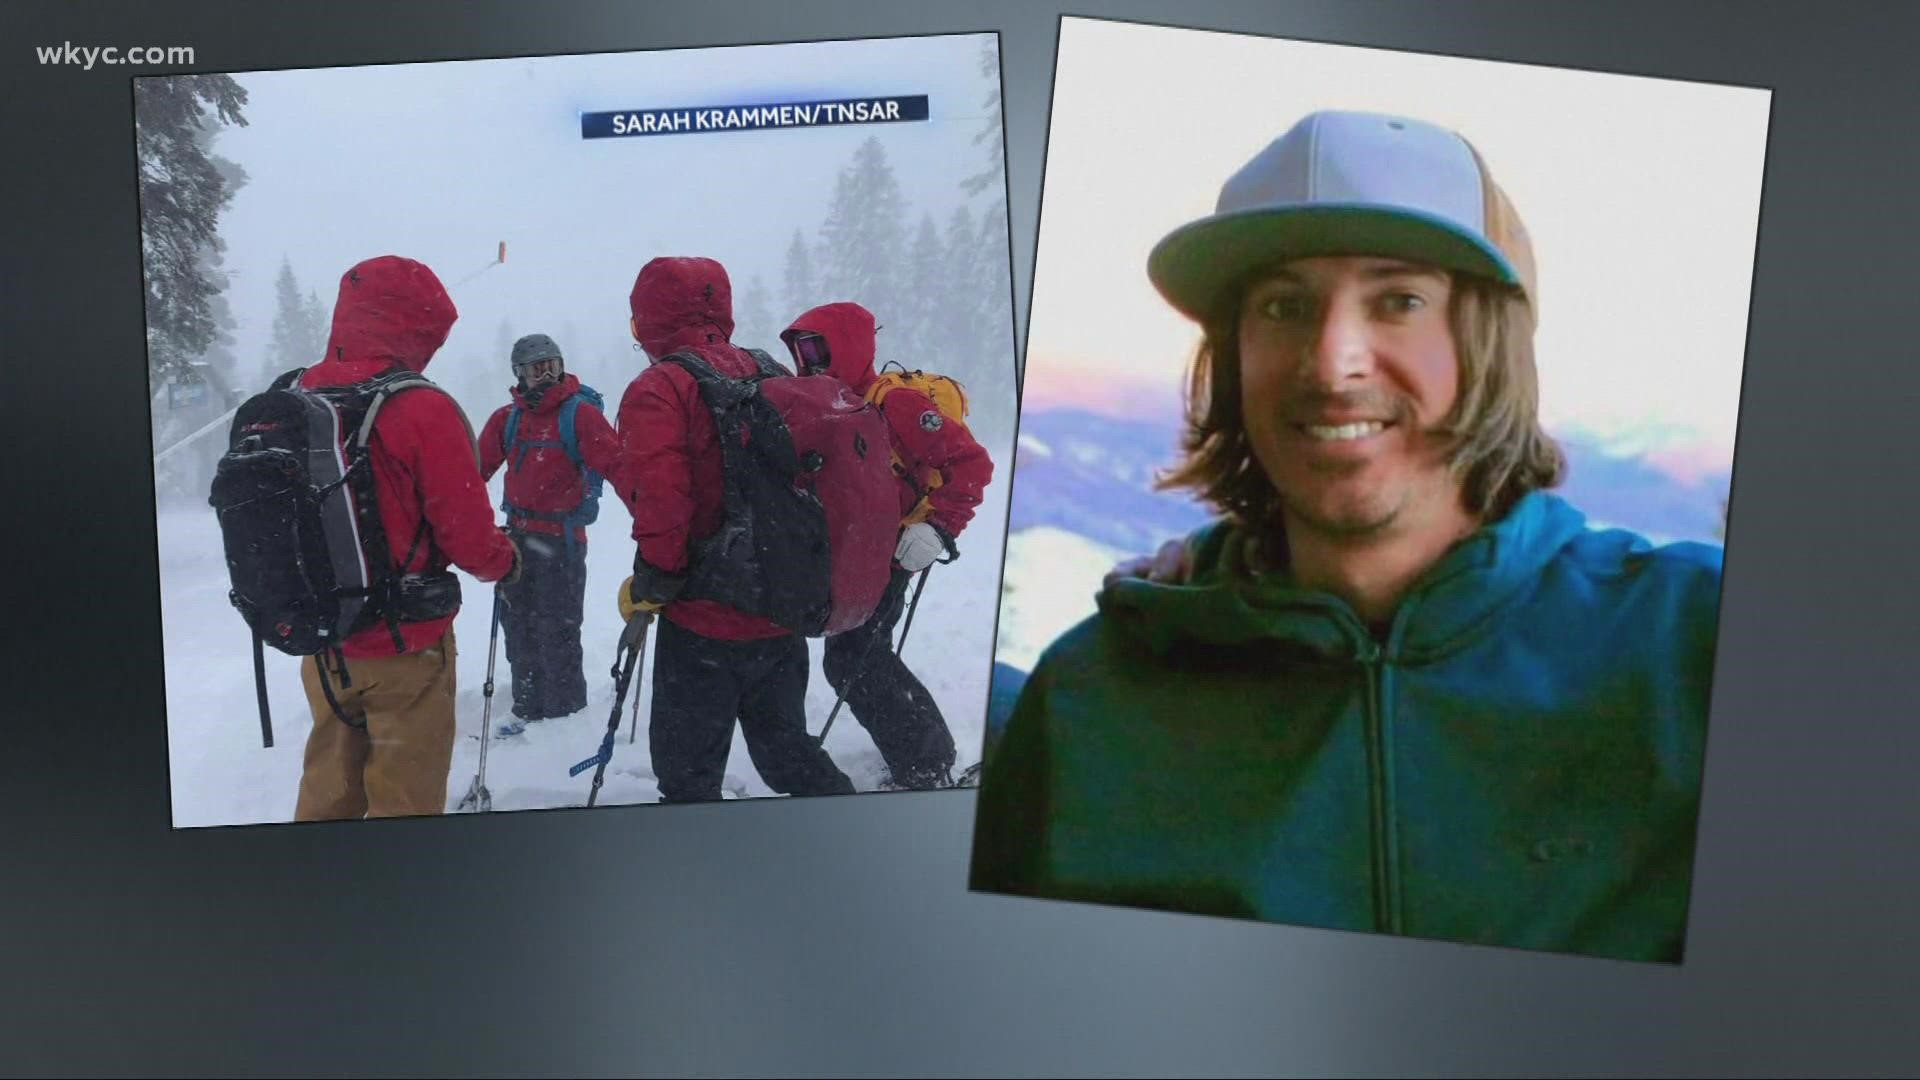 Officials say that Rory Angelotta's body was discovered a "considerable distance" away from the ski resort where he went missing.